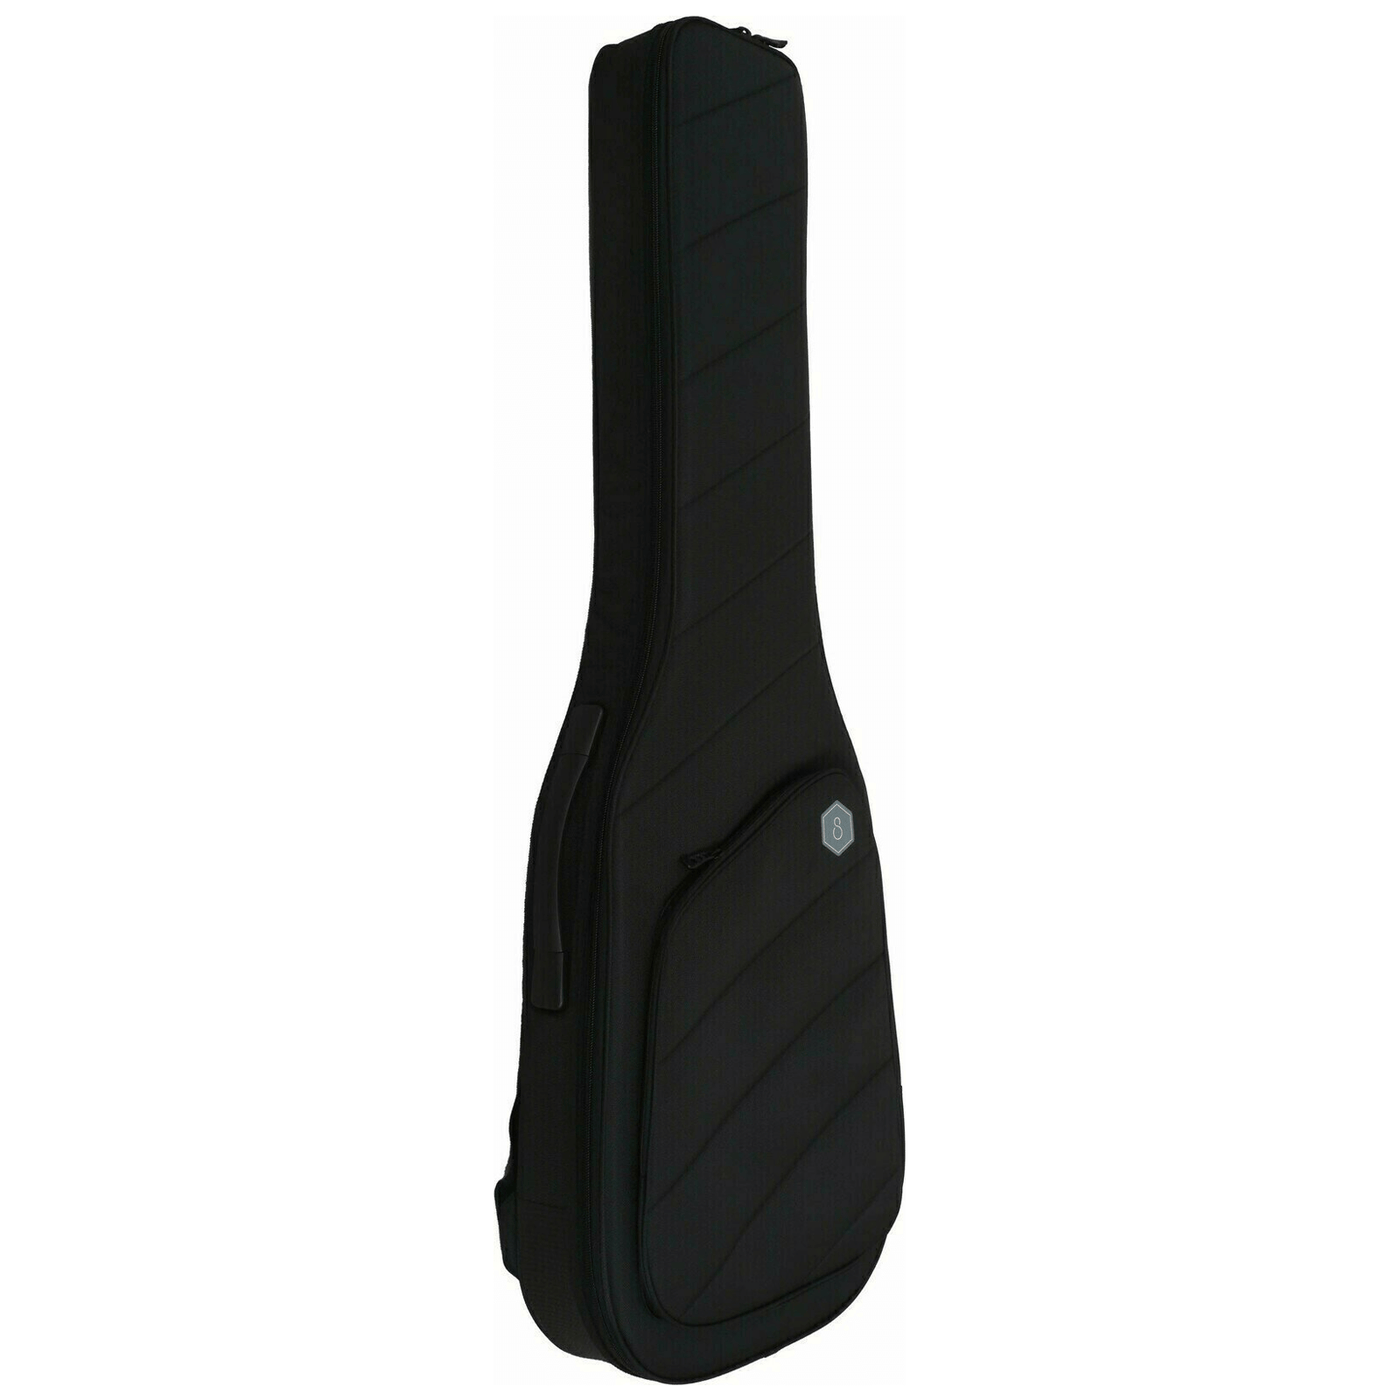 Sire Gig Bag - Funda de Bajo Eléctrico - Gig bag for V series basguitars. Designed for easy transport and protection of the instrument. Features robust zip-fastener, ergonomic handle, and compartment for accessories, etc. Features • Para los modelos M, P